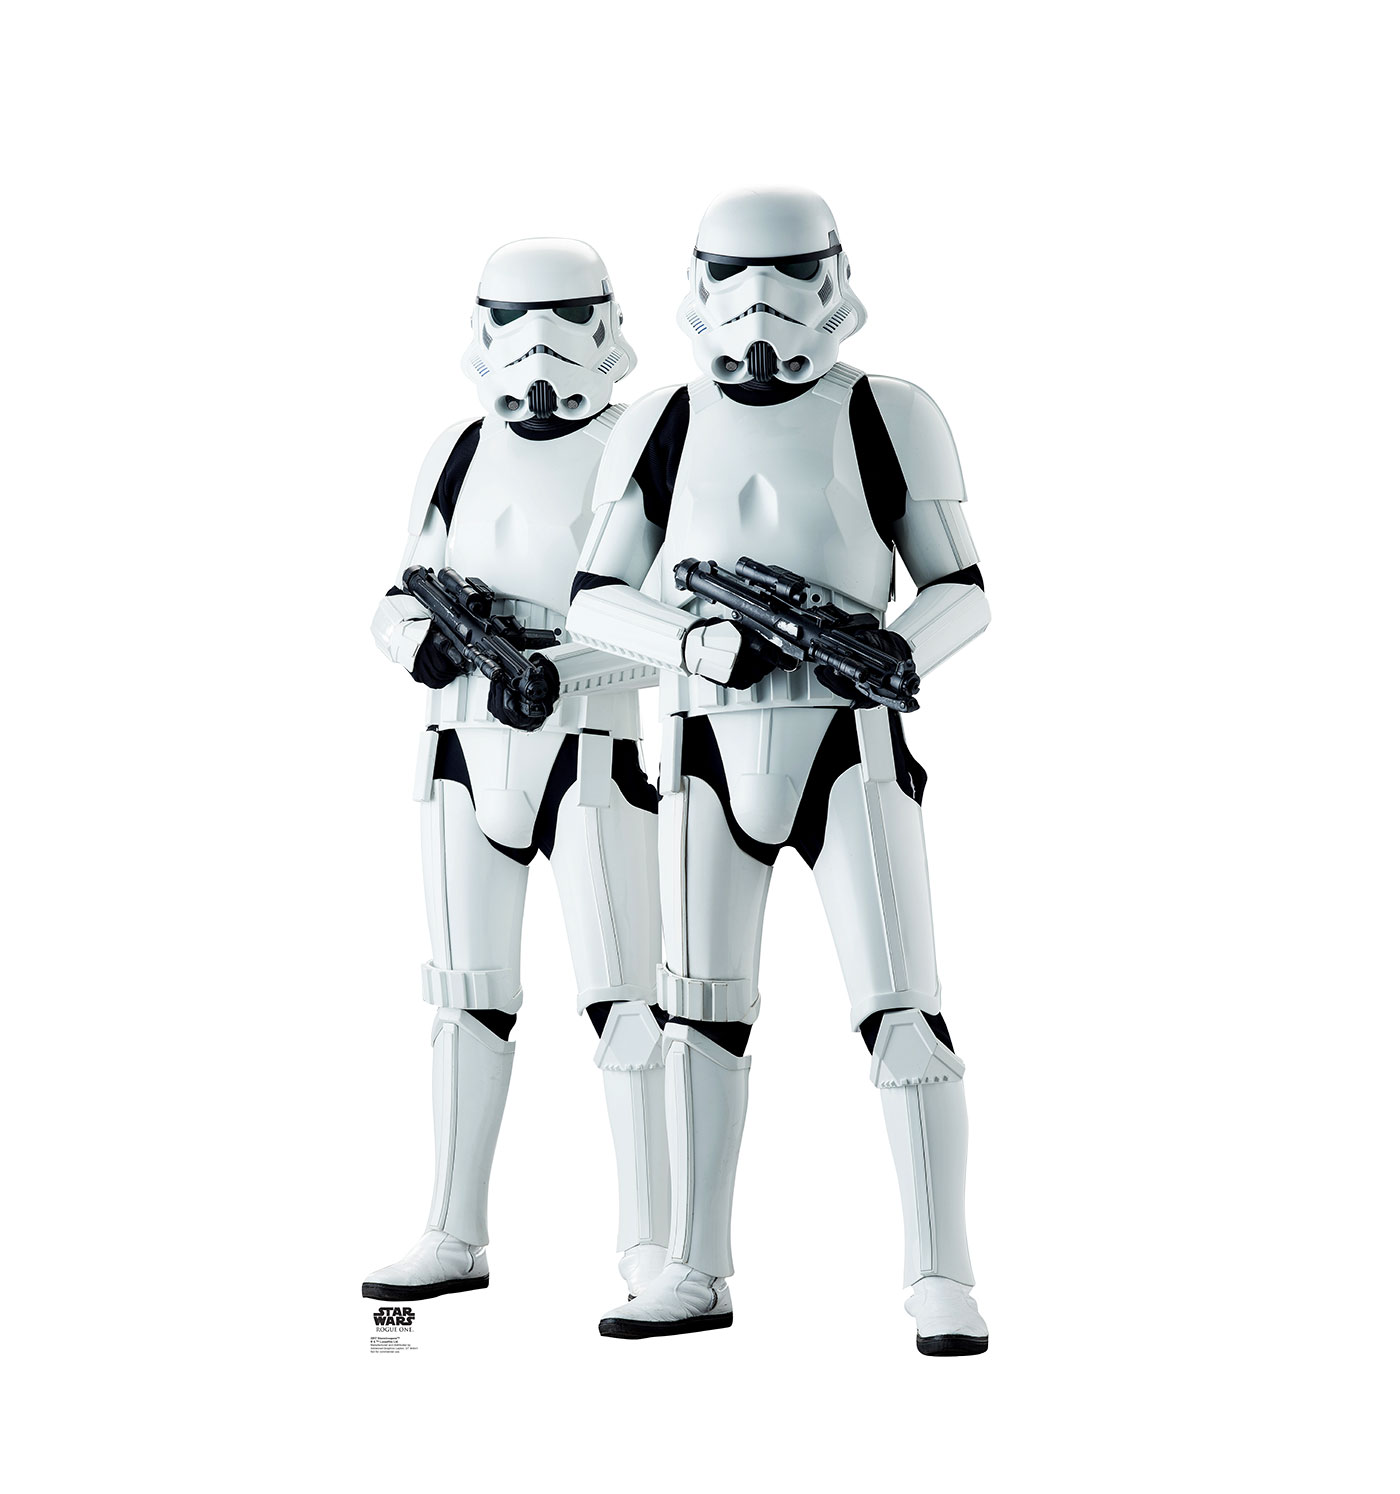 https://www.starwars-universe.com/images/actualites/rogueone/produits_derives/2257_Stormtroopers_R1_40.jpg